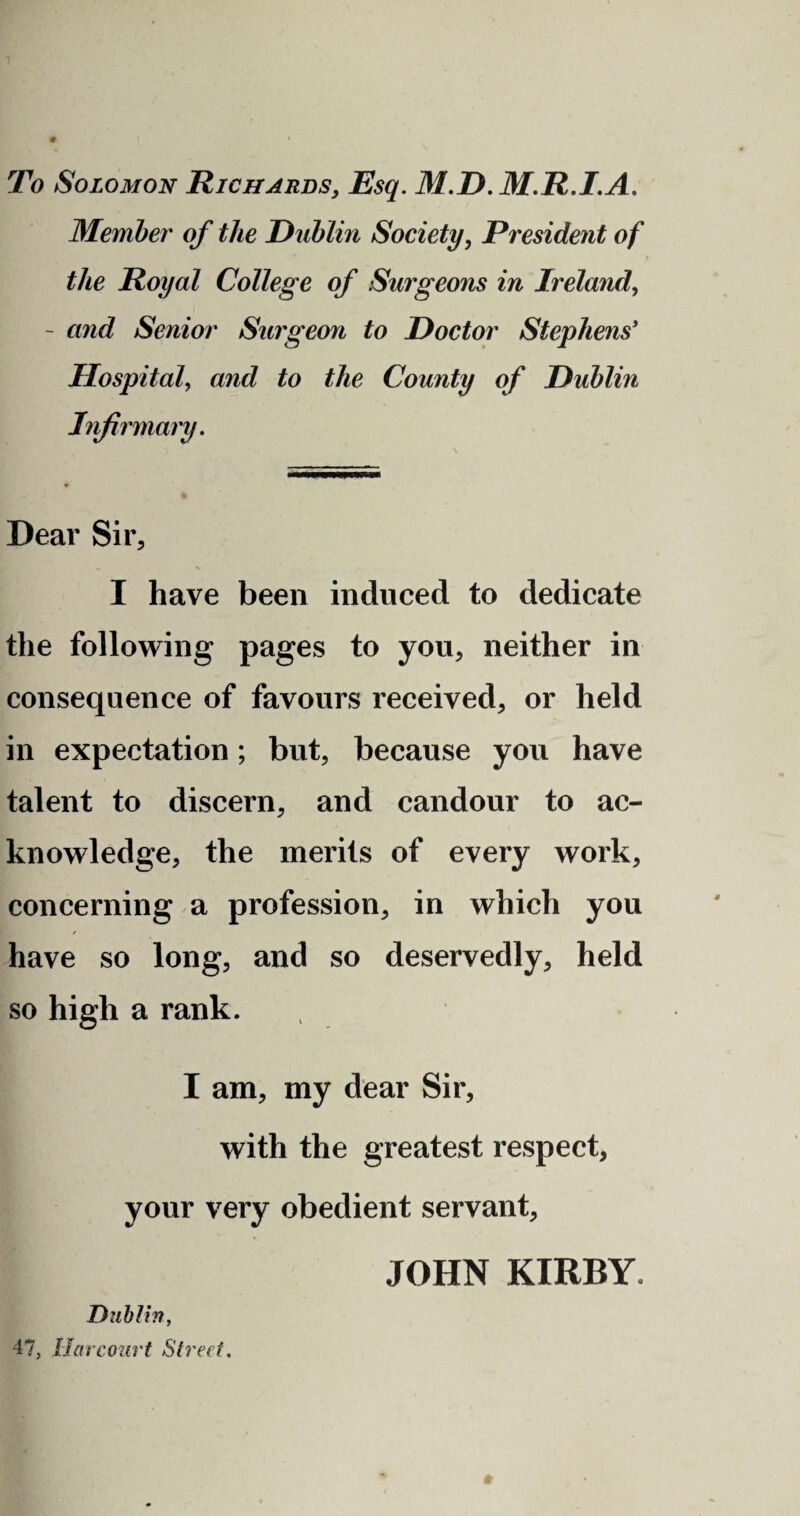 To Solomon Richards, Esq. 31.D. 3I.R.I.A. 3Iember of the Dublin Society, President of the Royal College of Surgeons in Ireland, - and Senior Surgeon to Doctor Stephens' Hospital, and to the County of Dublin Infirmary. Dear Sir, I have been induced to dedicate the following pages to you, neither in consequence of favours received, or held in expectation; but, because you have talent to discern, and candour to ac¬ knowledge, the merits of every work, concerning a profession, in which you have so long, and so deservedly, held so high a rank. I am, my dear Sir, with the greatest respect, your very obedient servant, JOHN KIRBY. Dublin, 47, liar court Street.